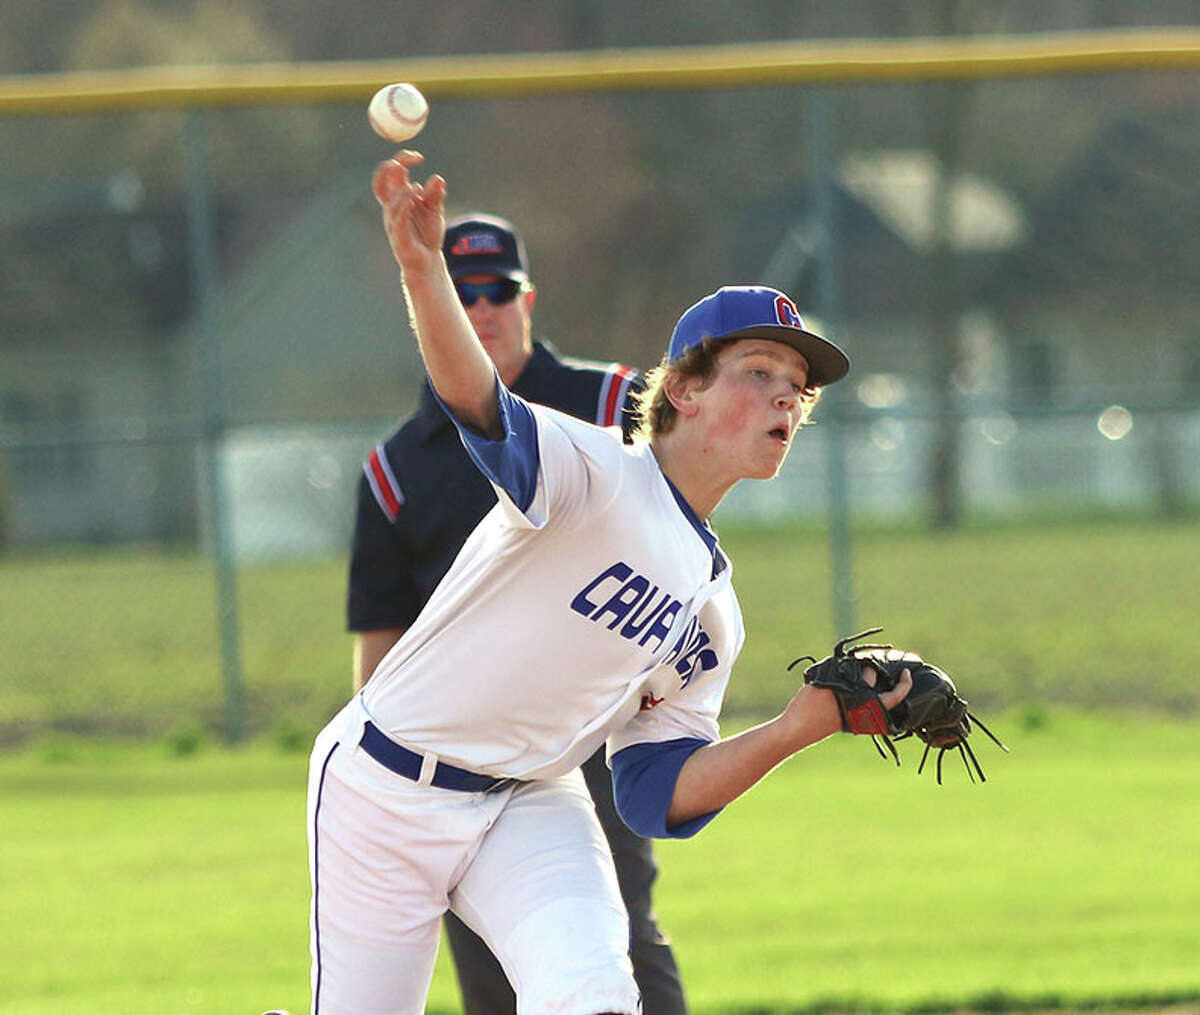 Carlinville's Ryenn Hart turned in a strong start, but took the loss Friday in a 3-2 SCC defeat to the Gillespie Miners.